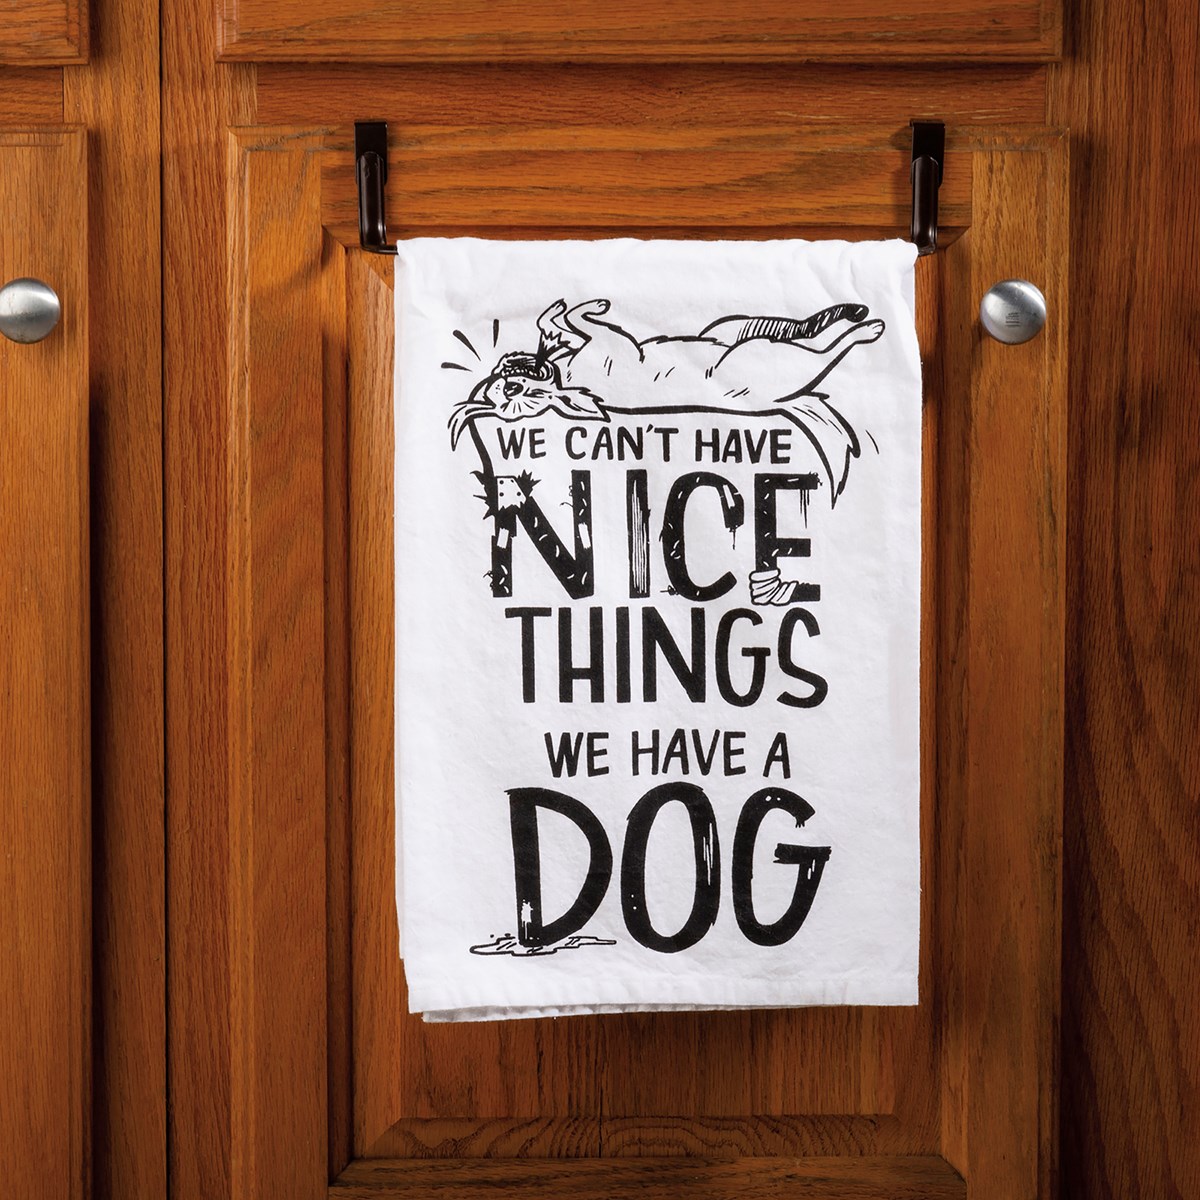 Can't Have Nice Things Have A Dog Kitchen Towel - Cotton